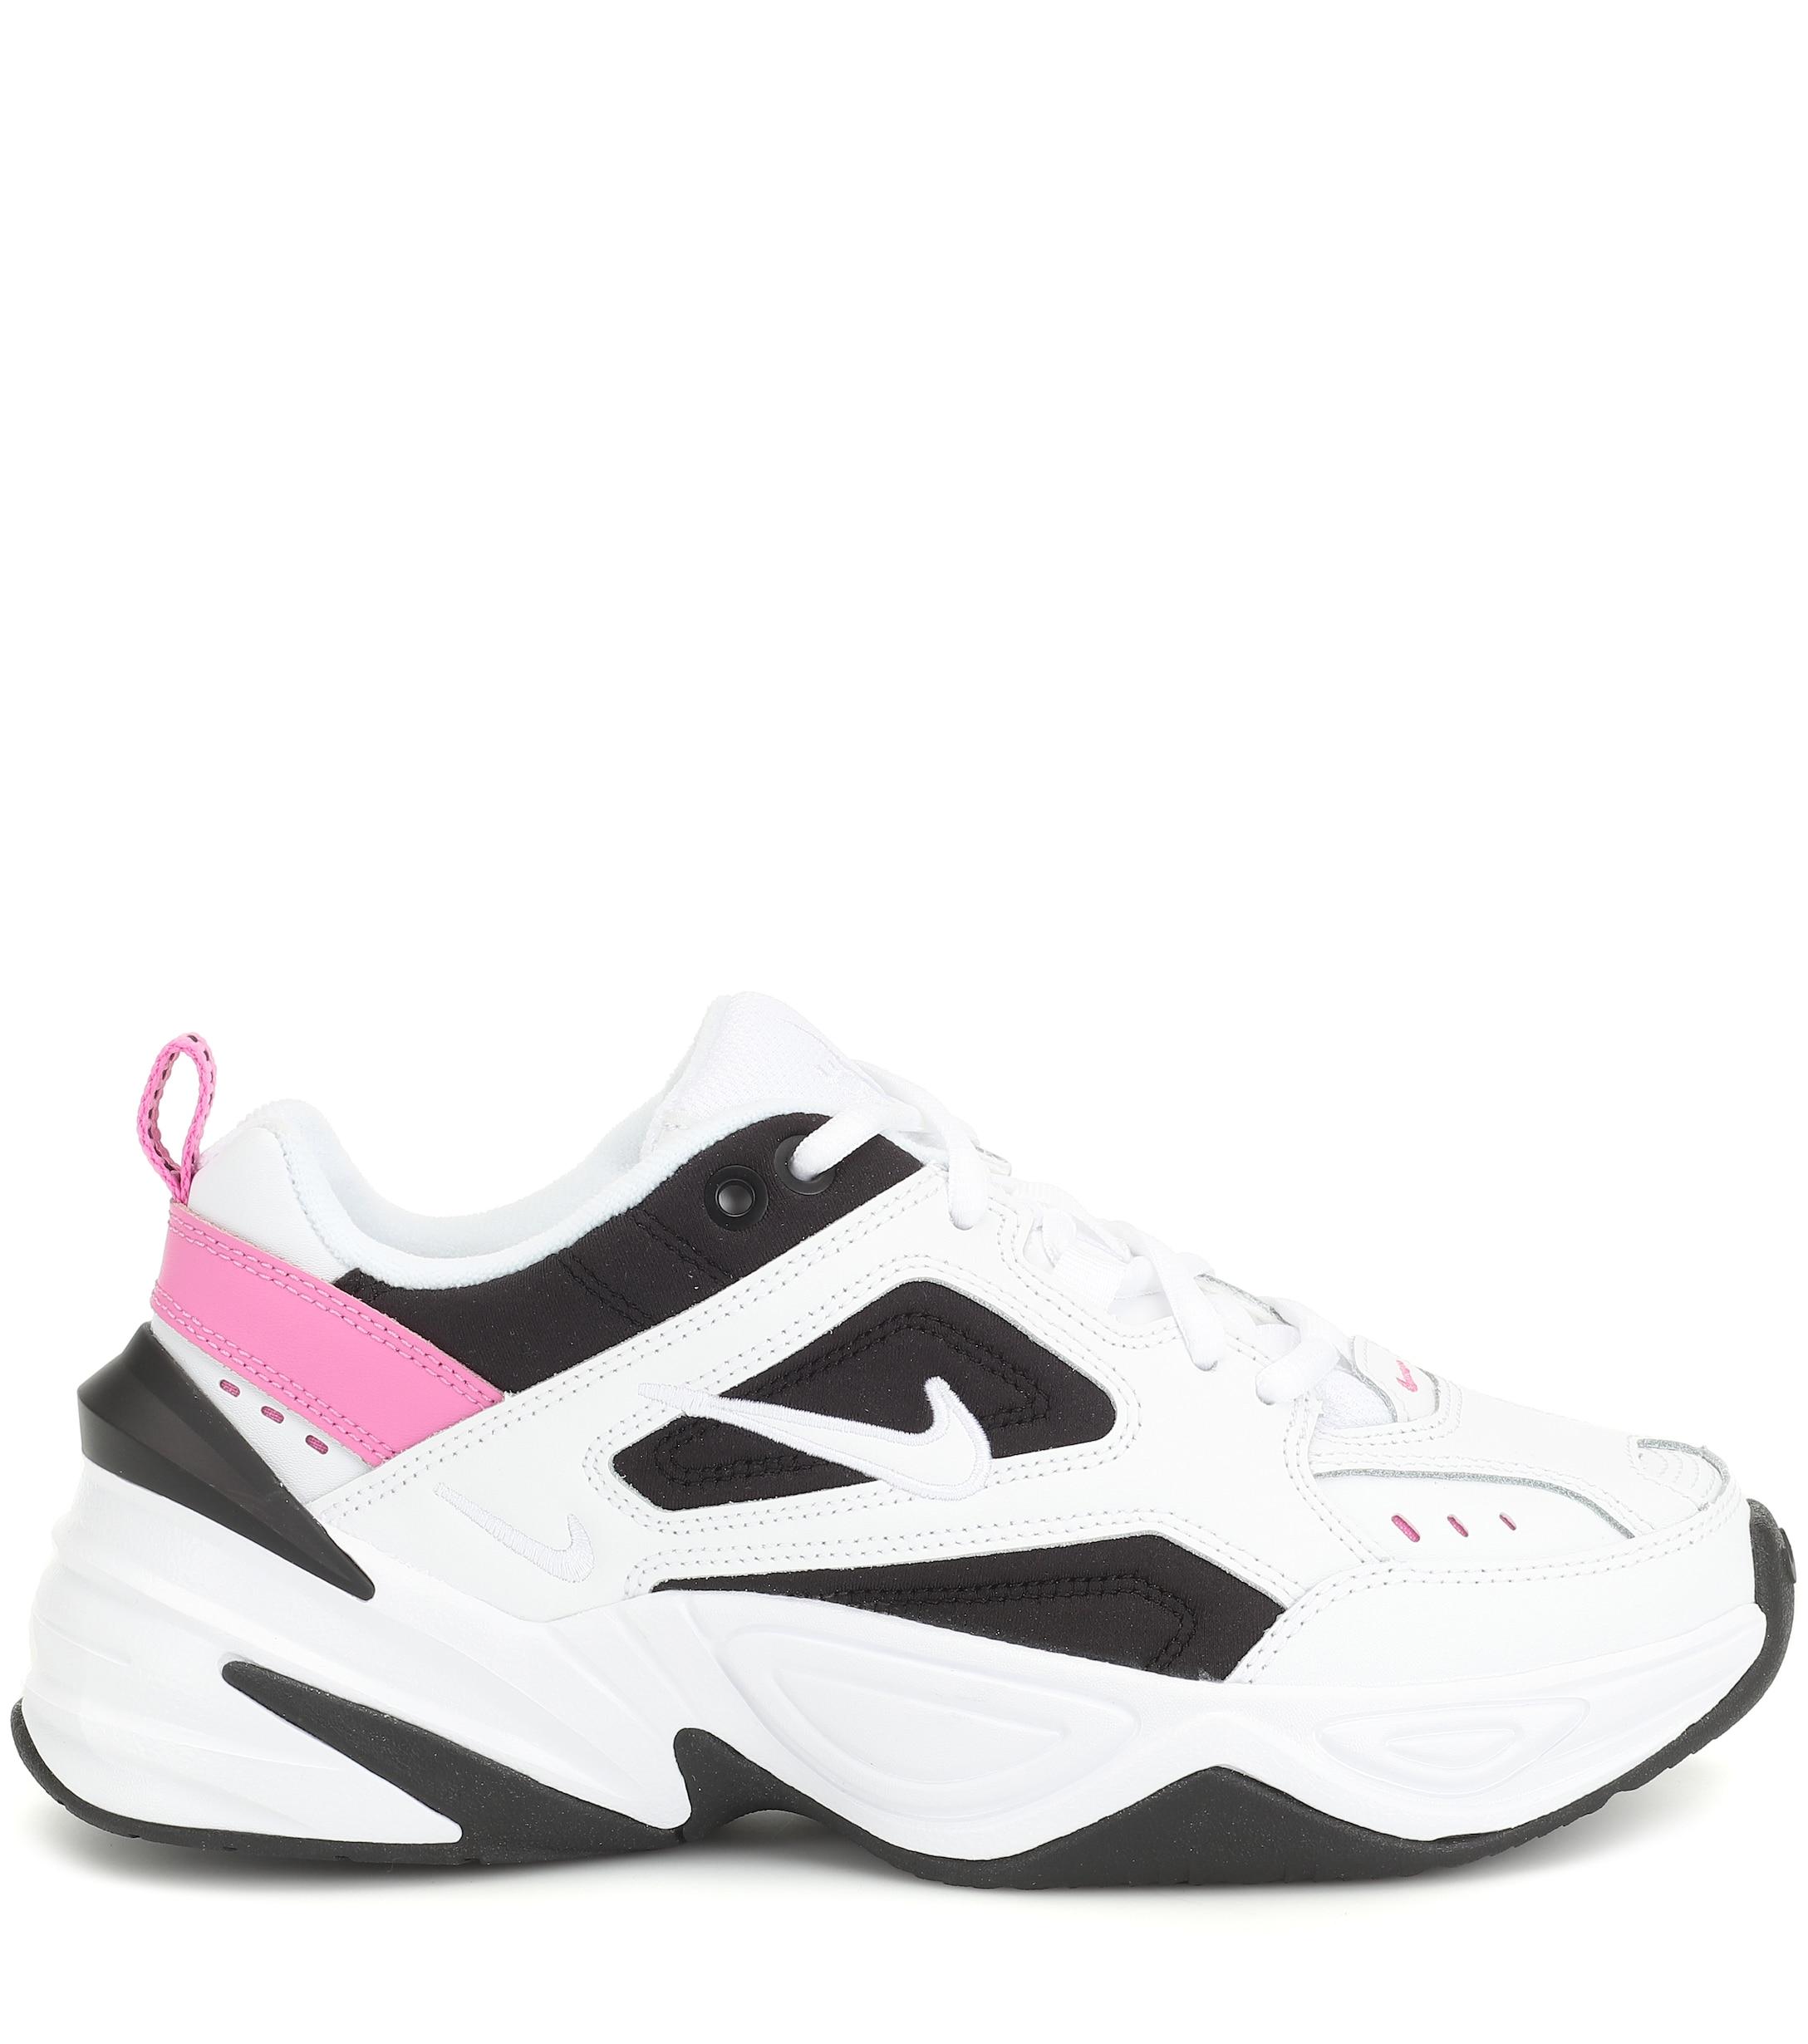 nike m2k tekno trainers in white black and pink